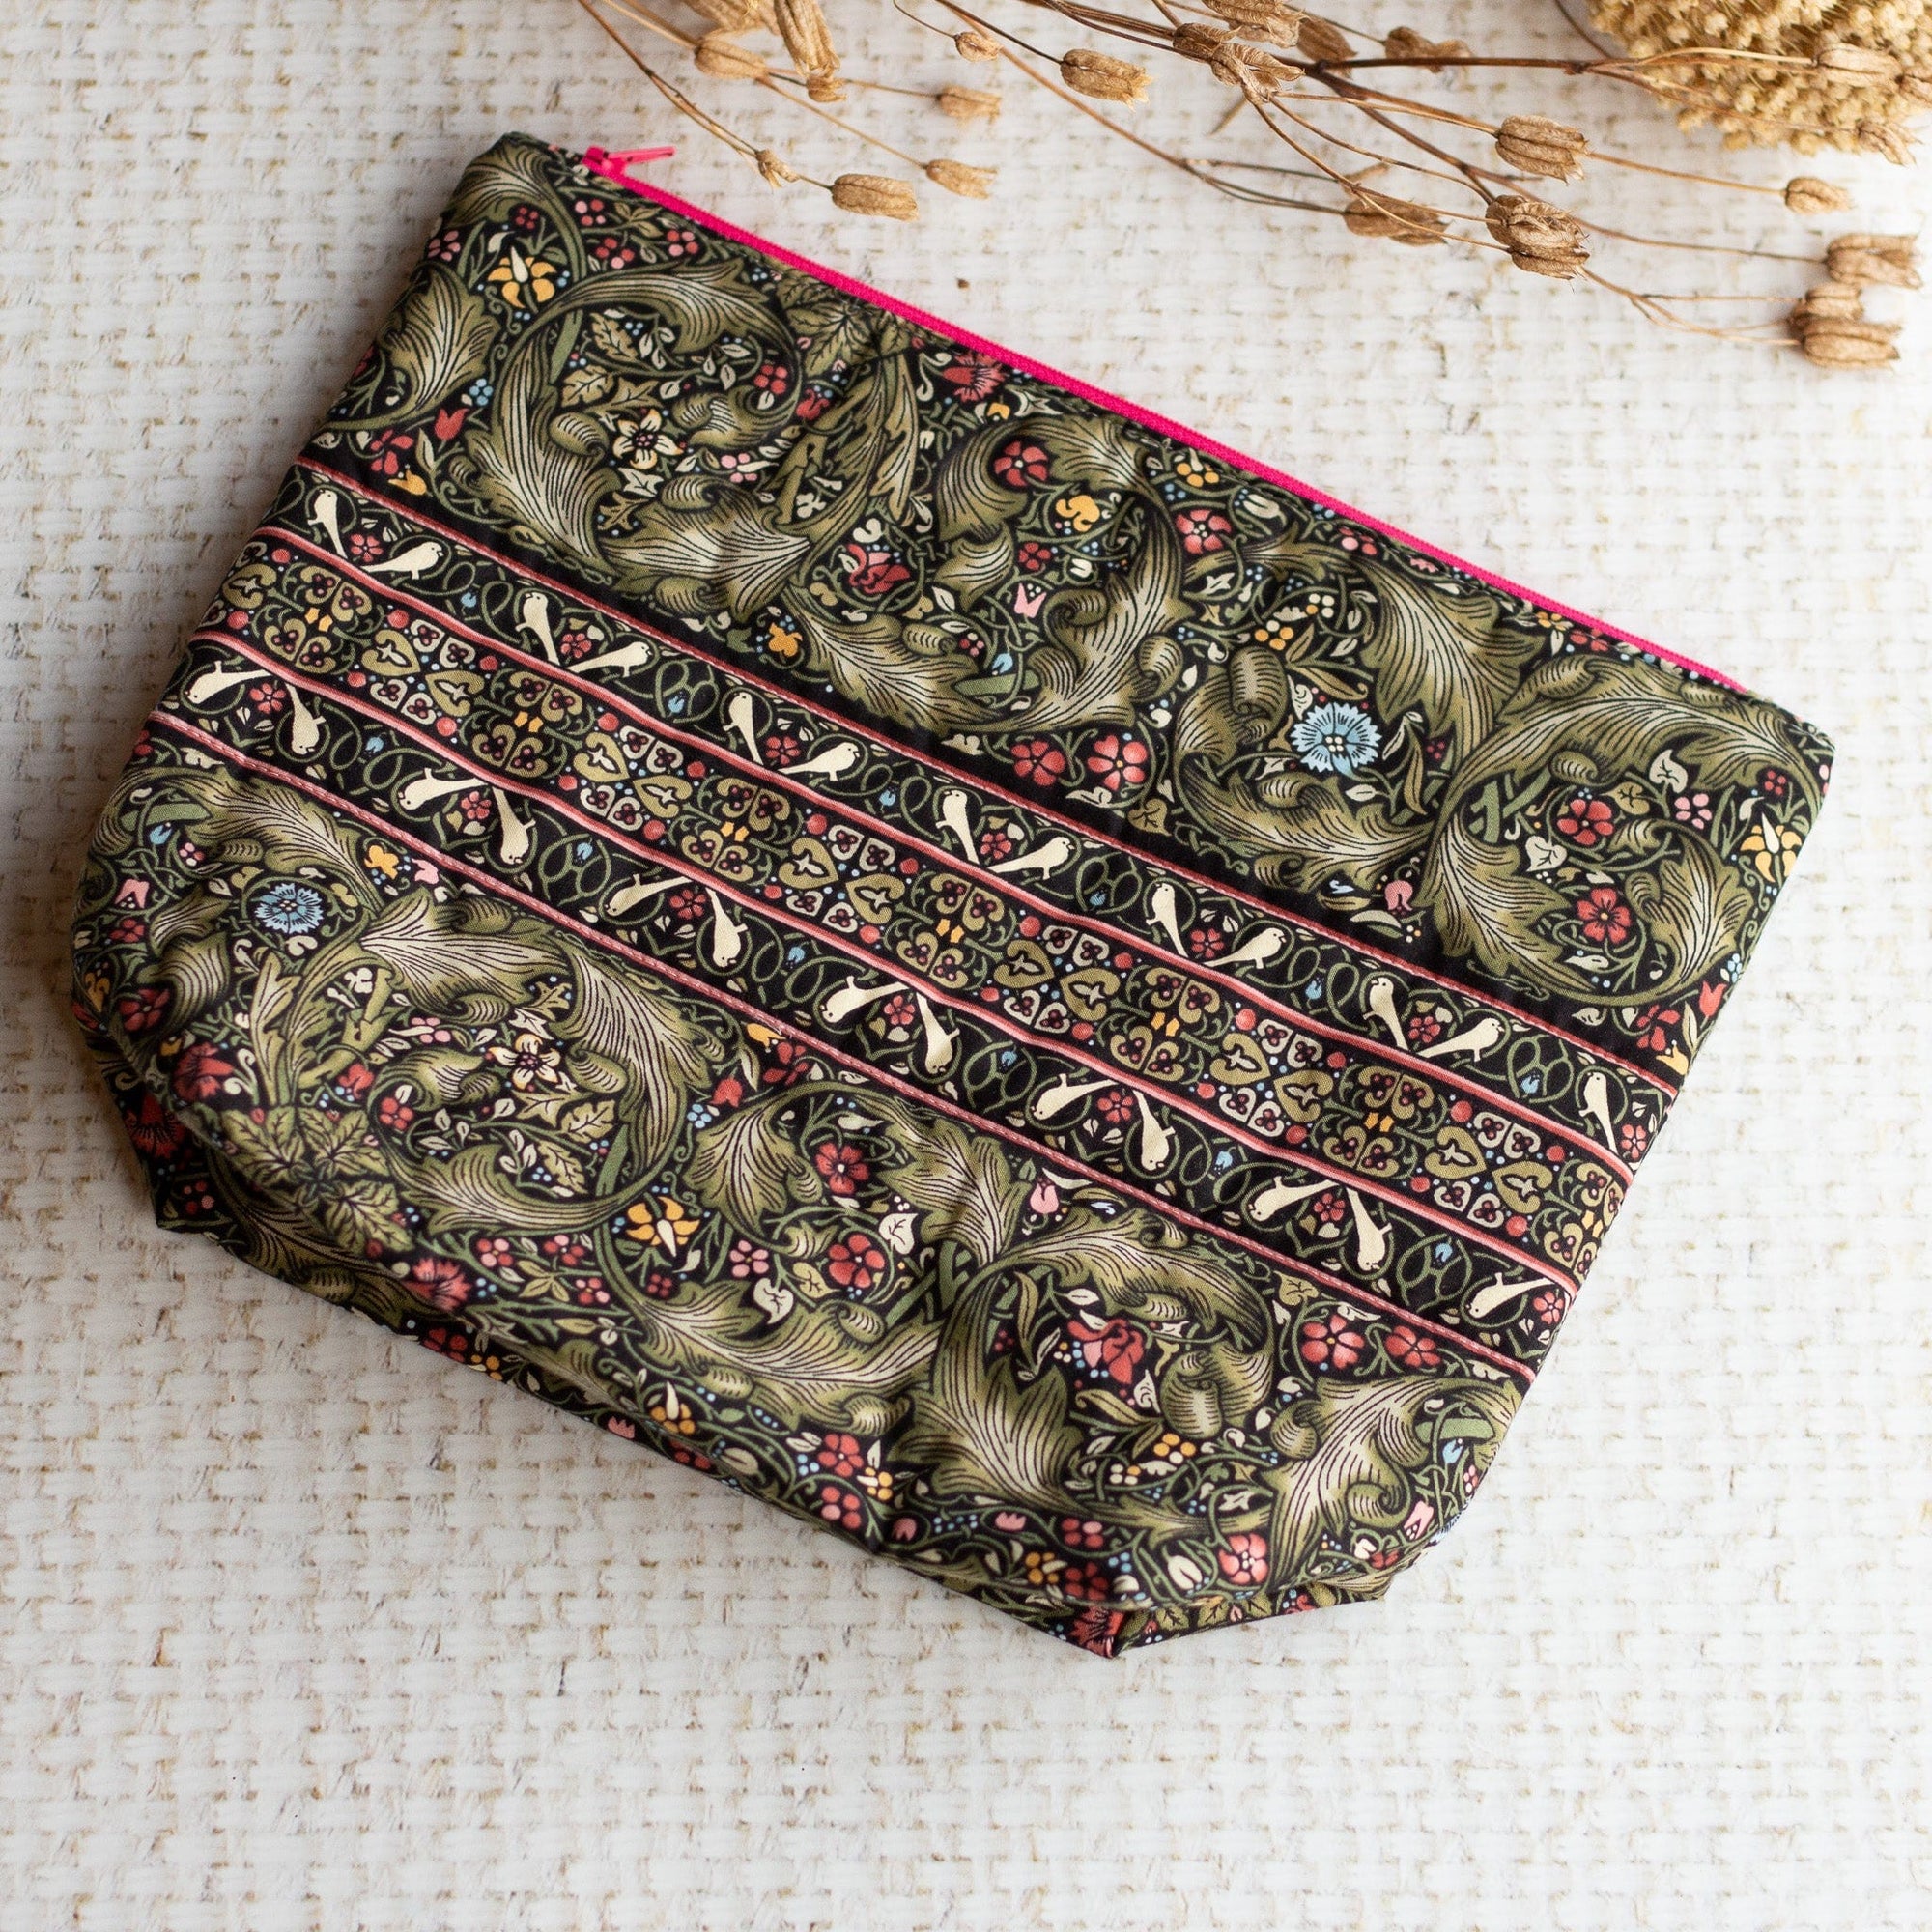 Madge Collection Bag 4 The Madge Collection - Large 'William Morris' Zipper Project Bags